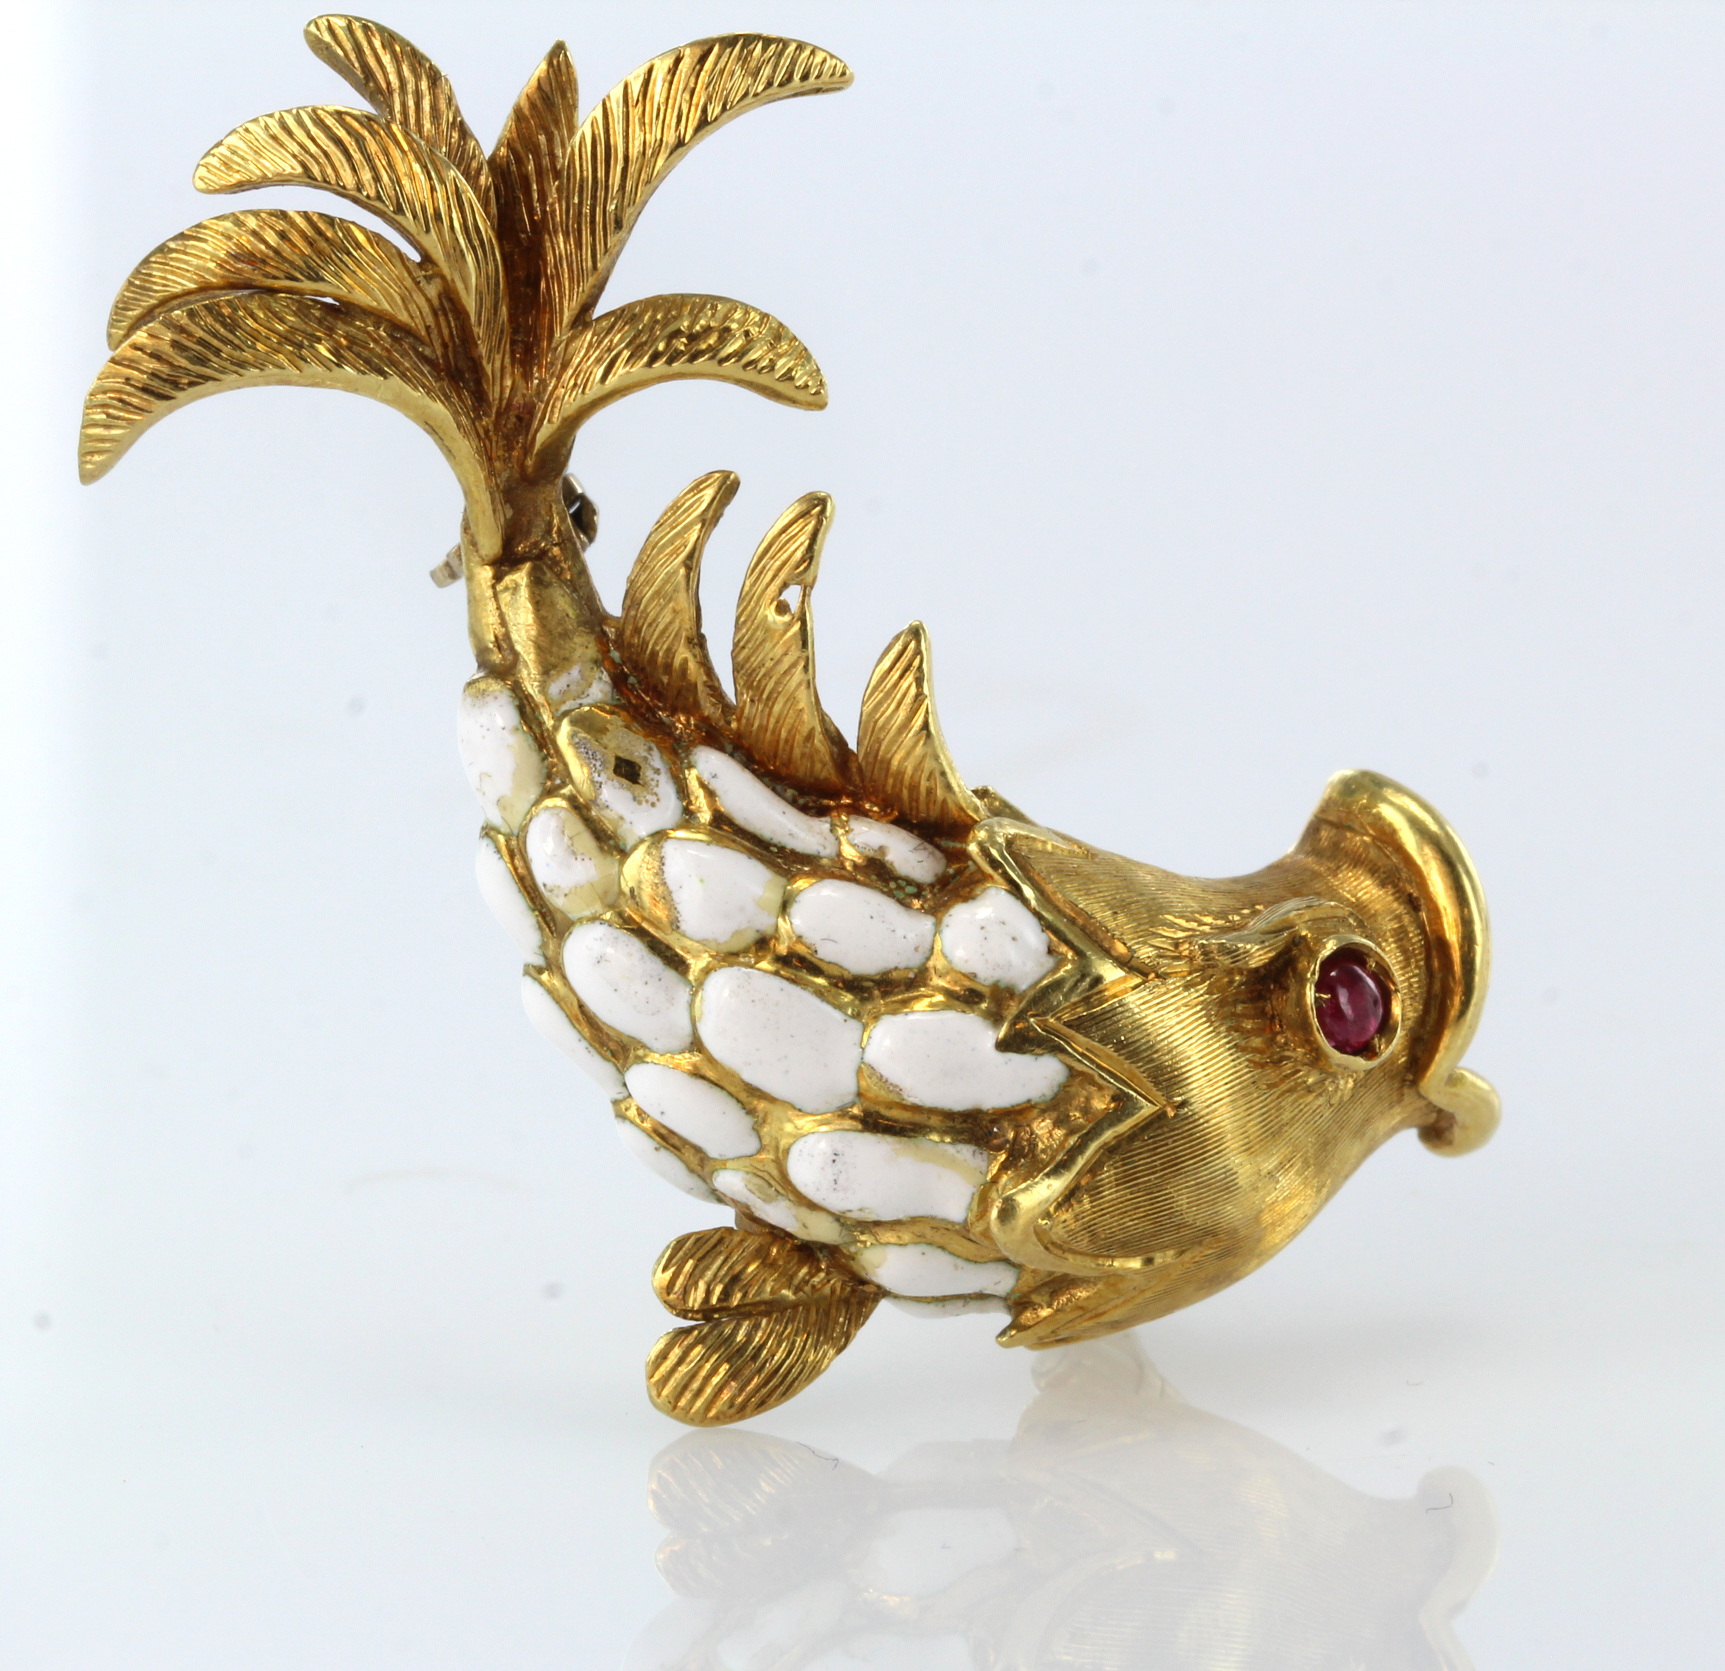 18ct yellow gold brooch in the shape of a leaping fish with a ruby eye and white enamel scales,